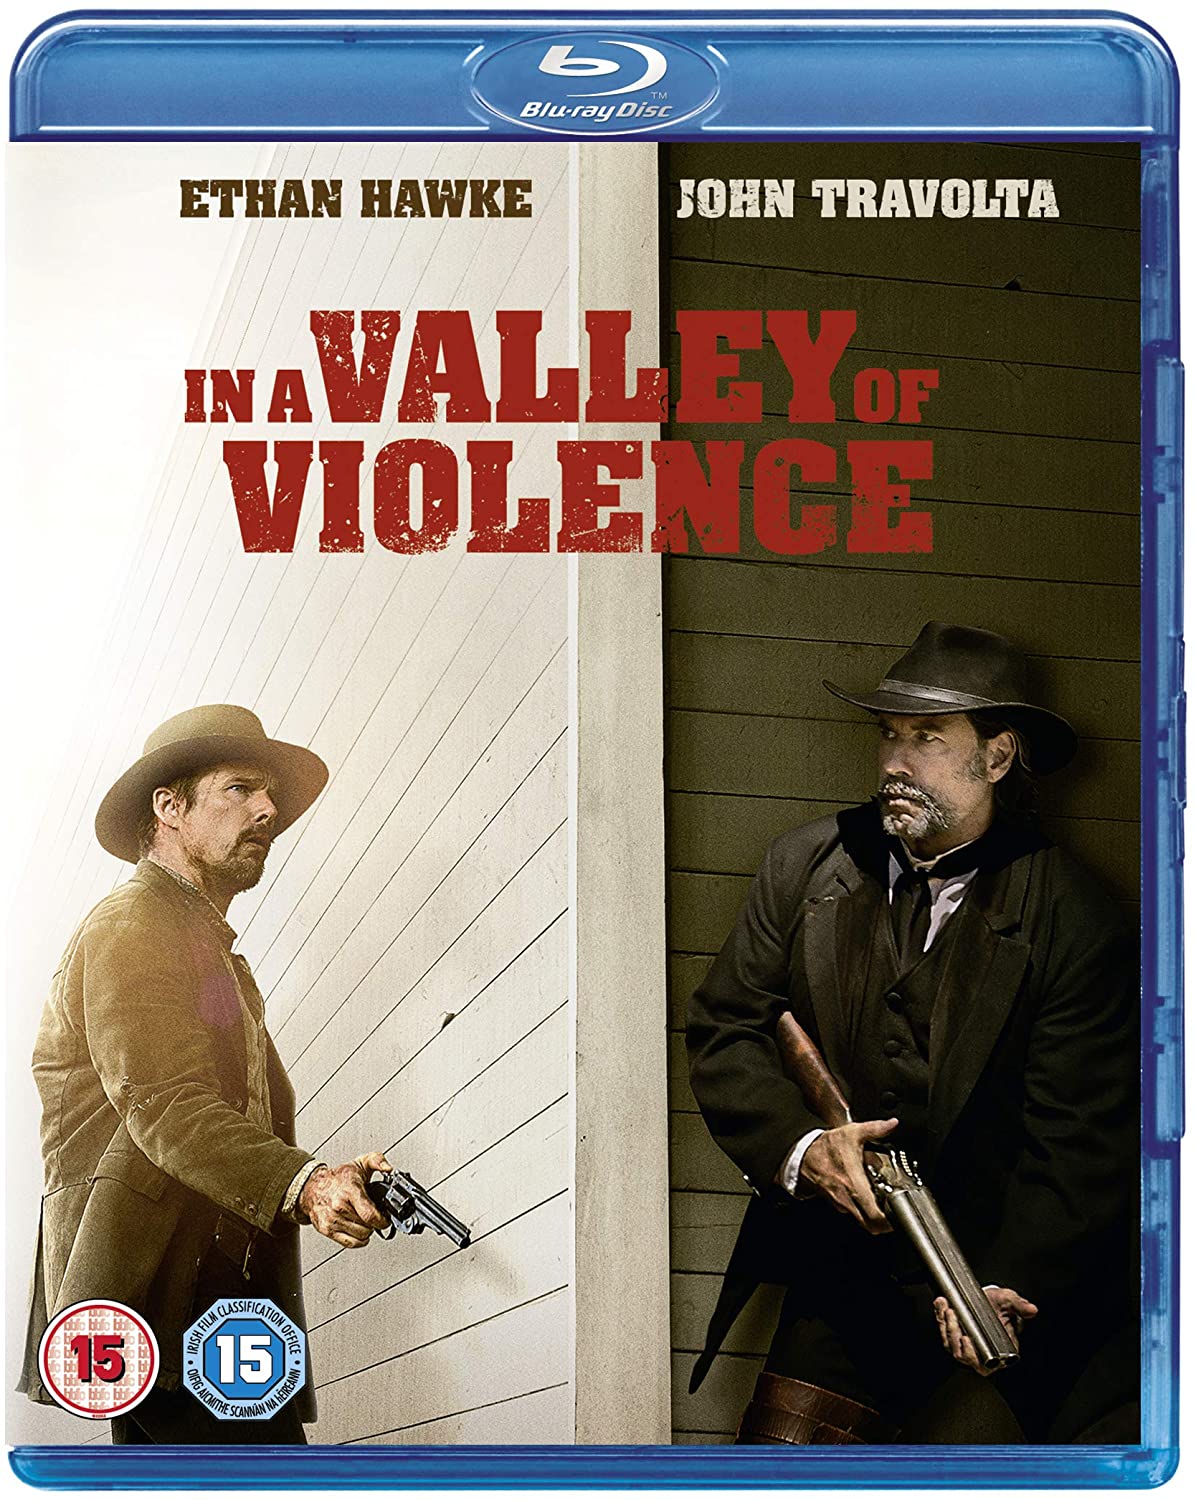 In A Valley Of Violence (Blu-ray)